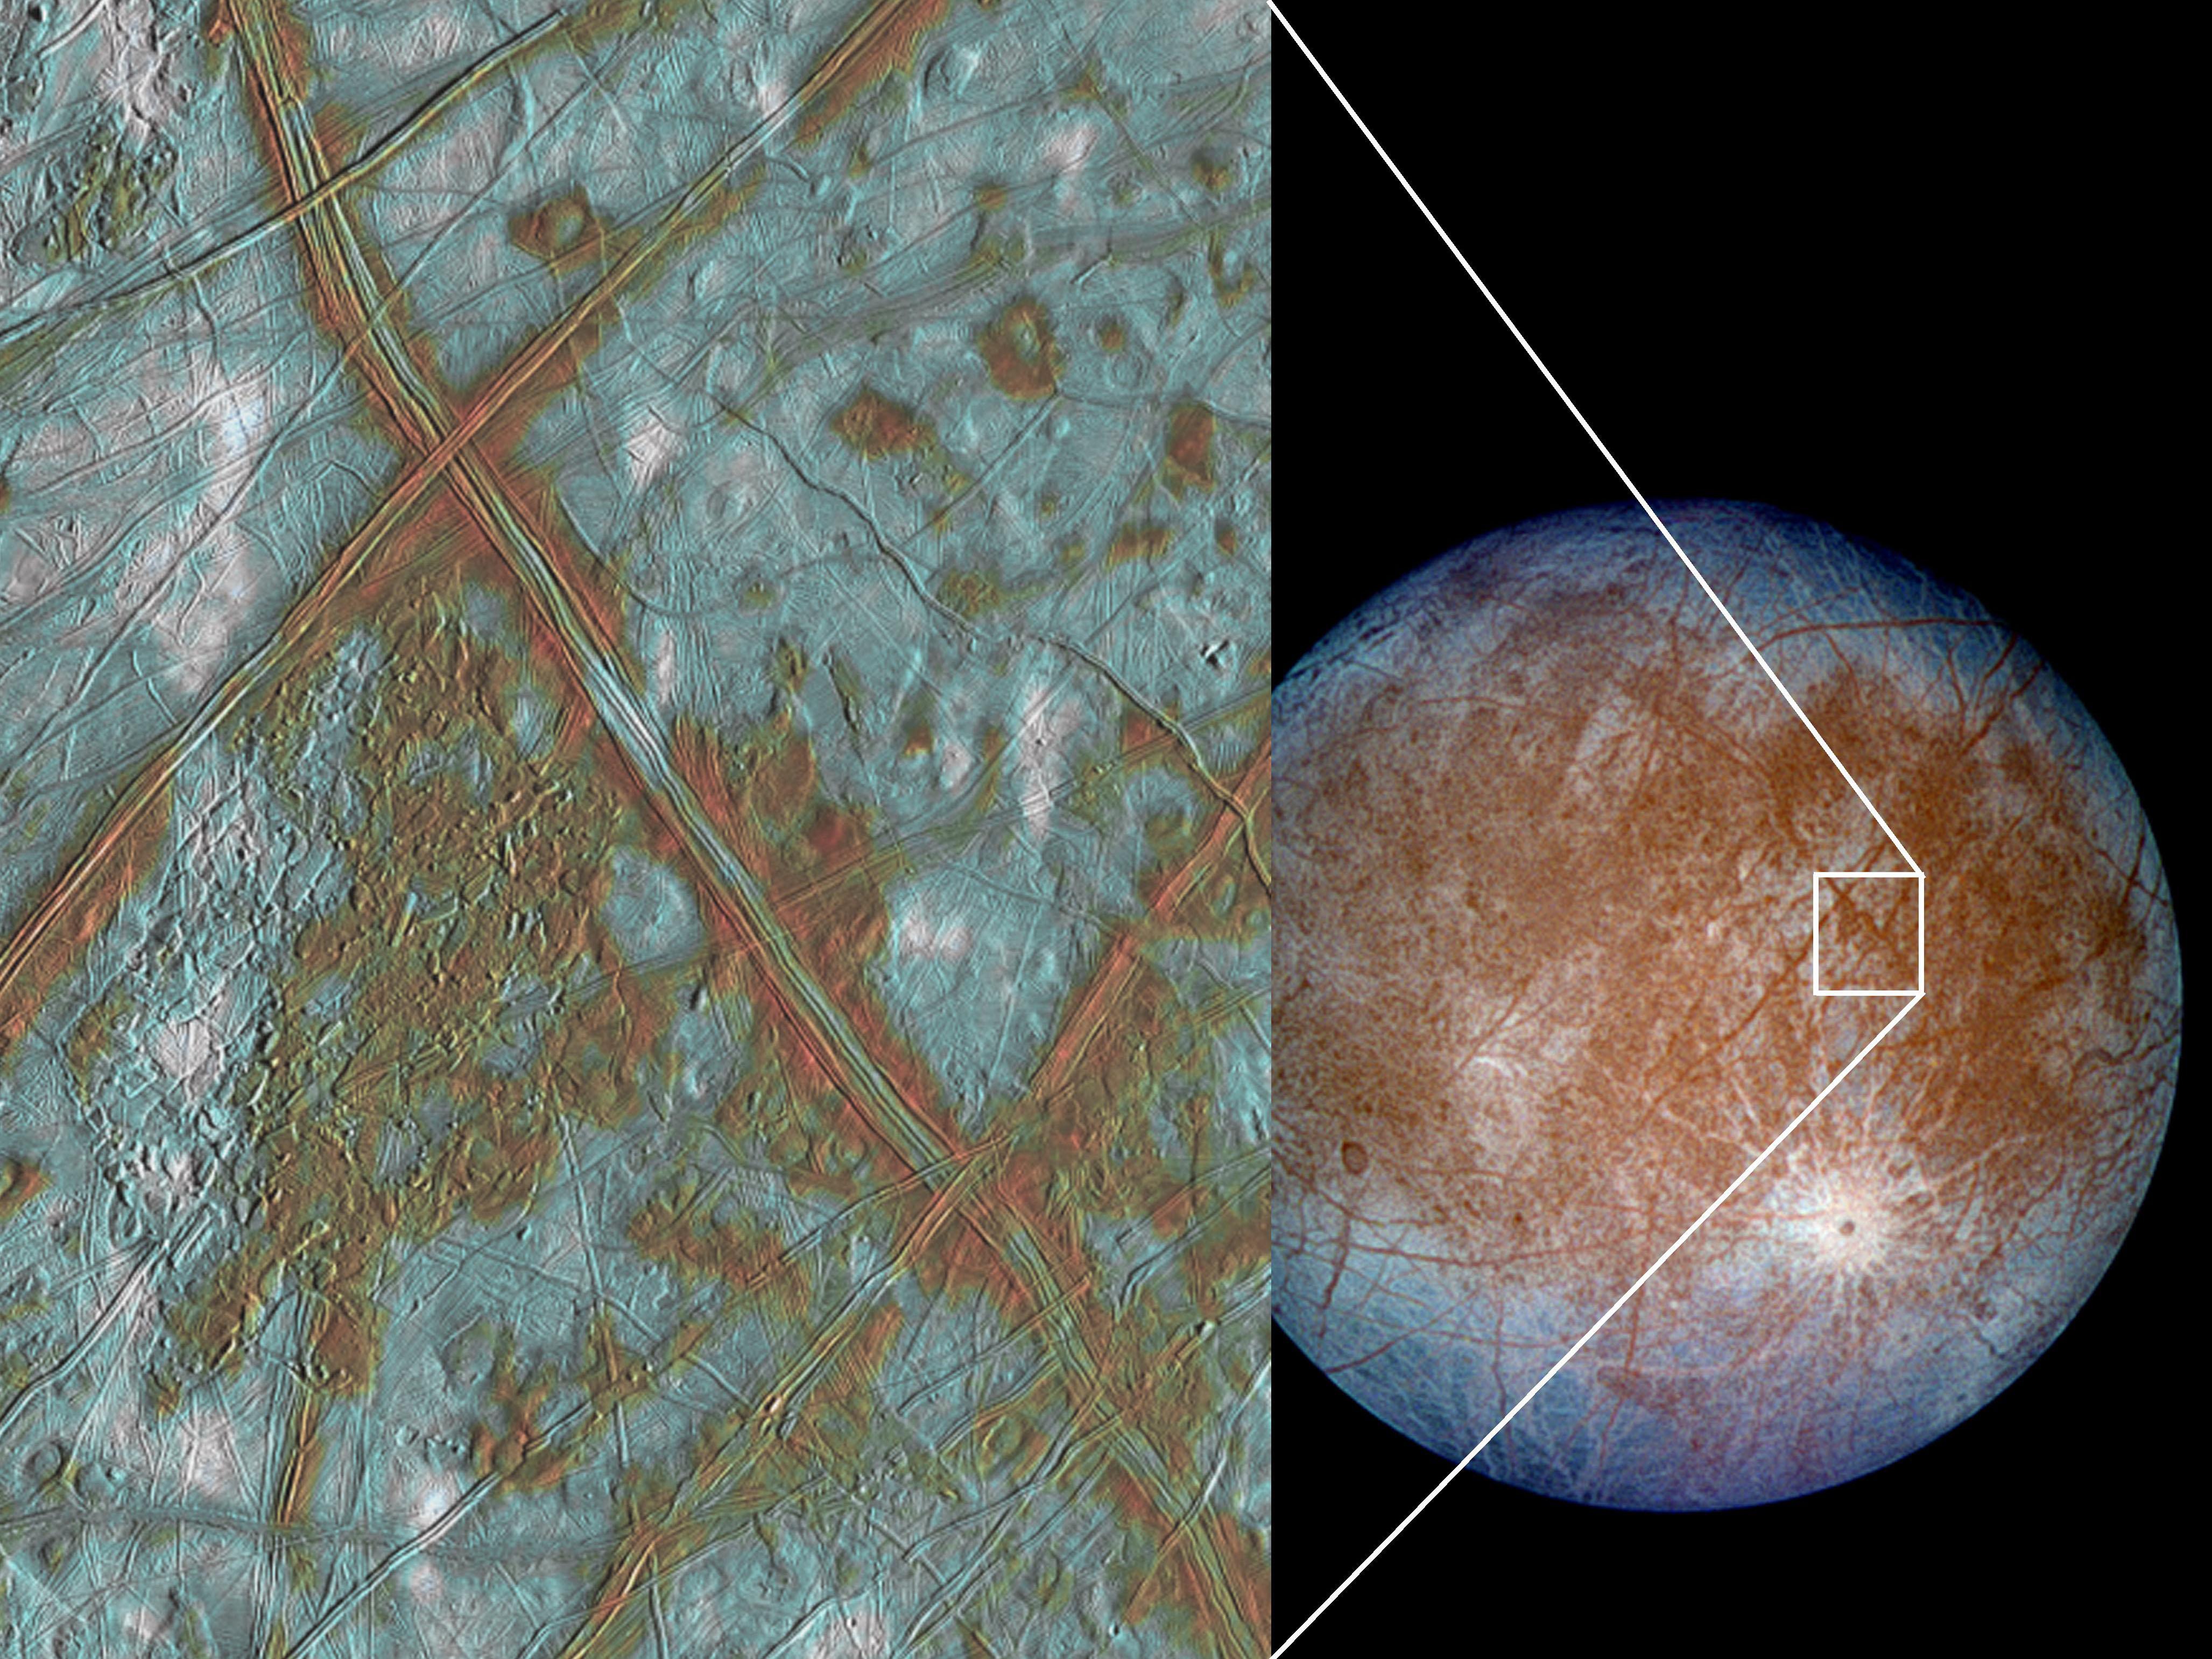 Jupiter's moon Europa has a crust made up of blocks, which are thought to have broken apart and 'rafted' into new positions.